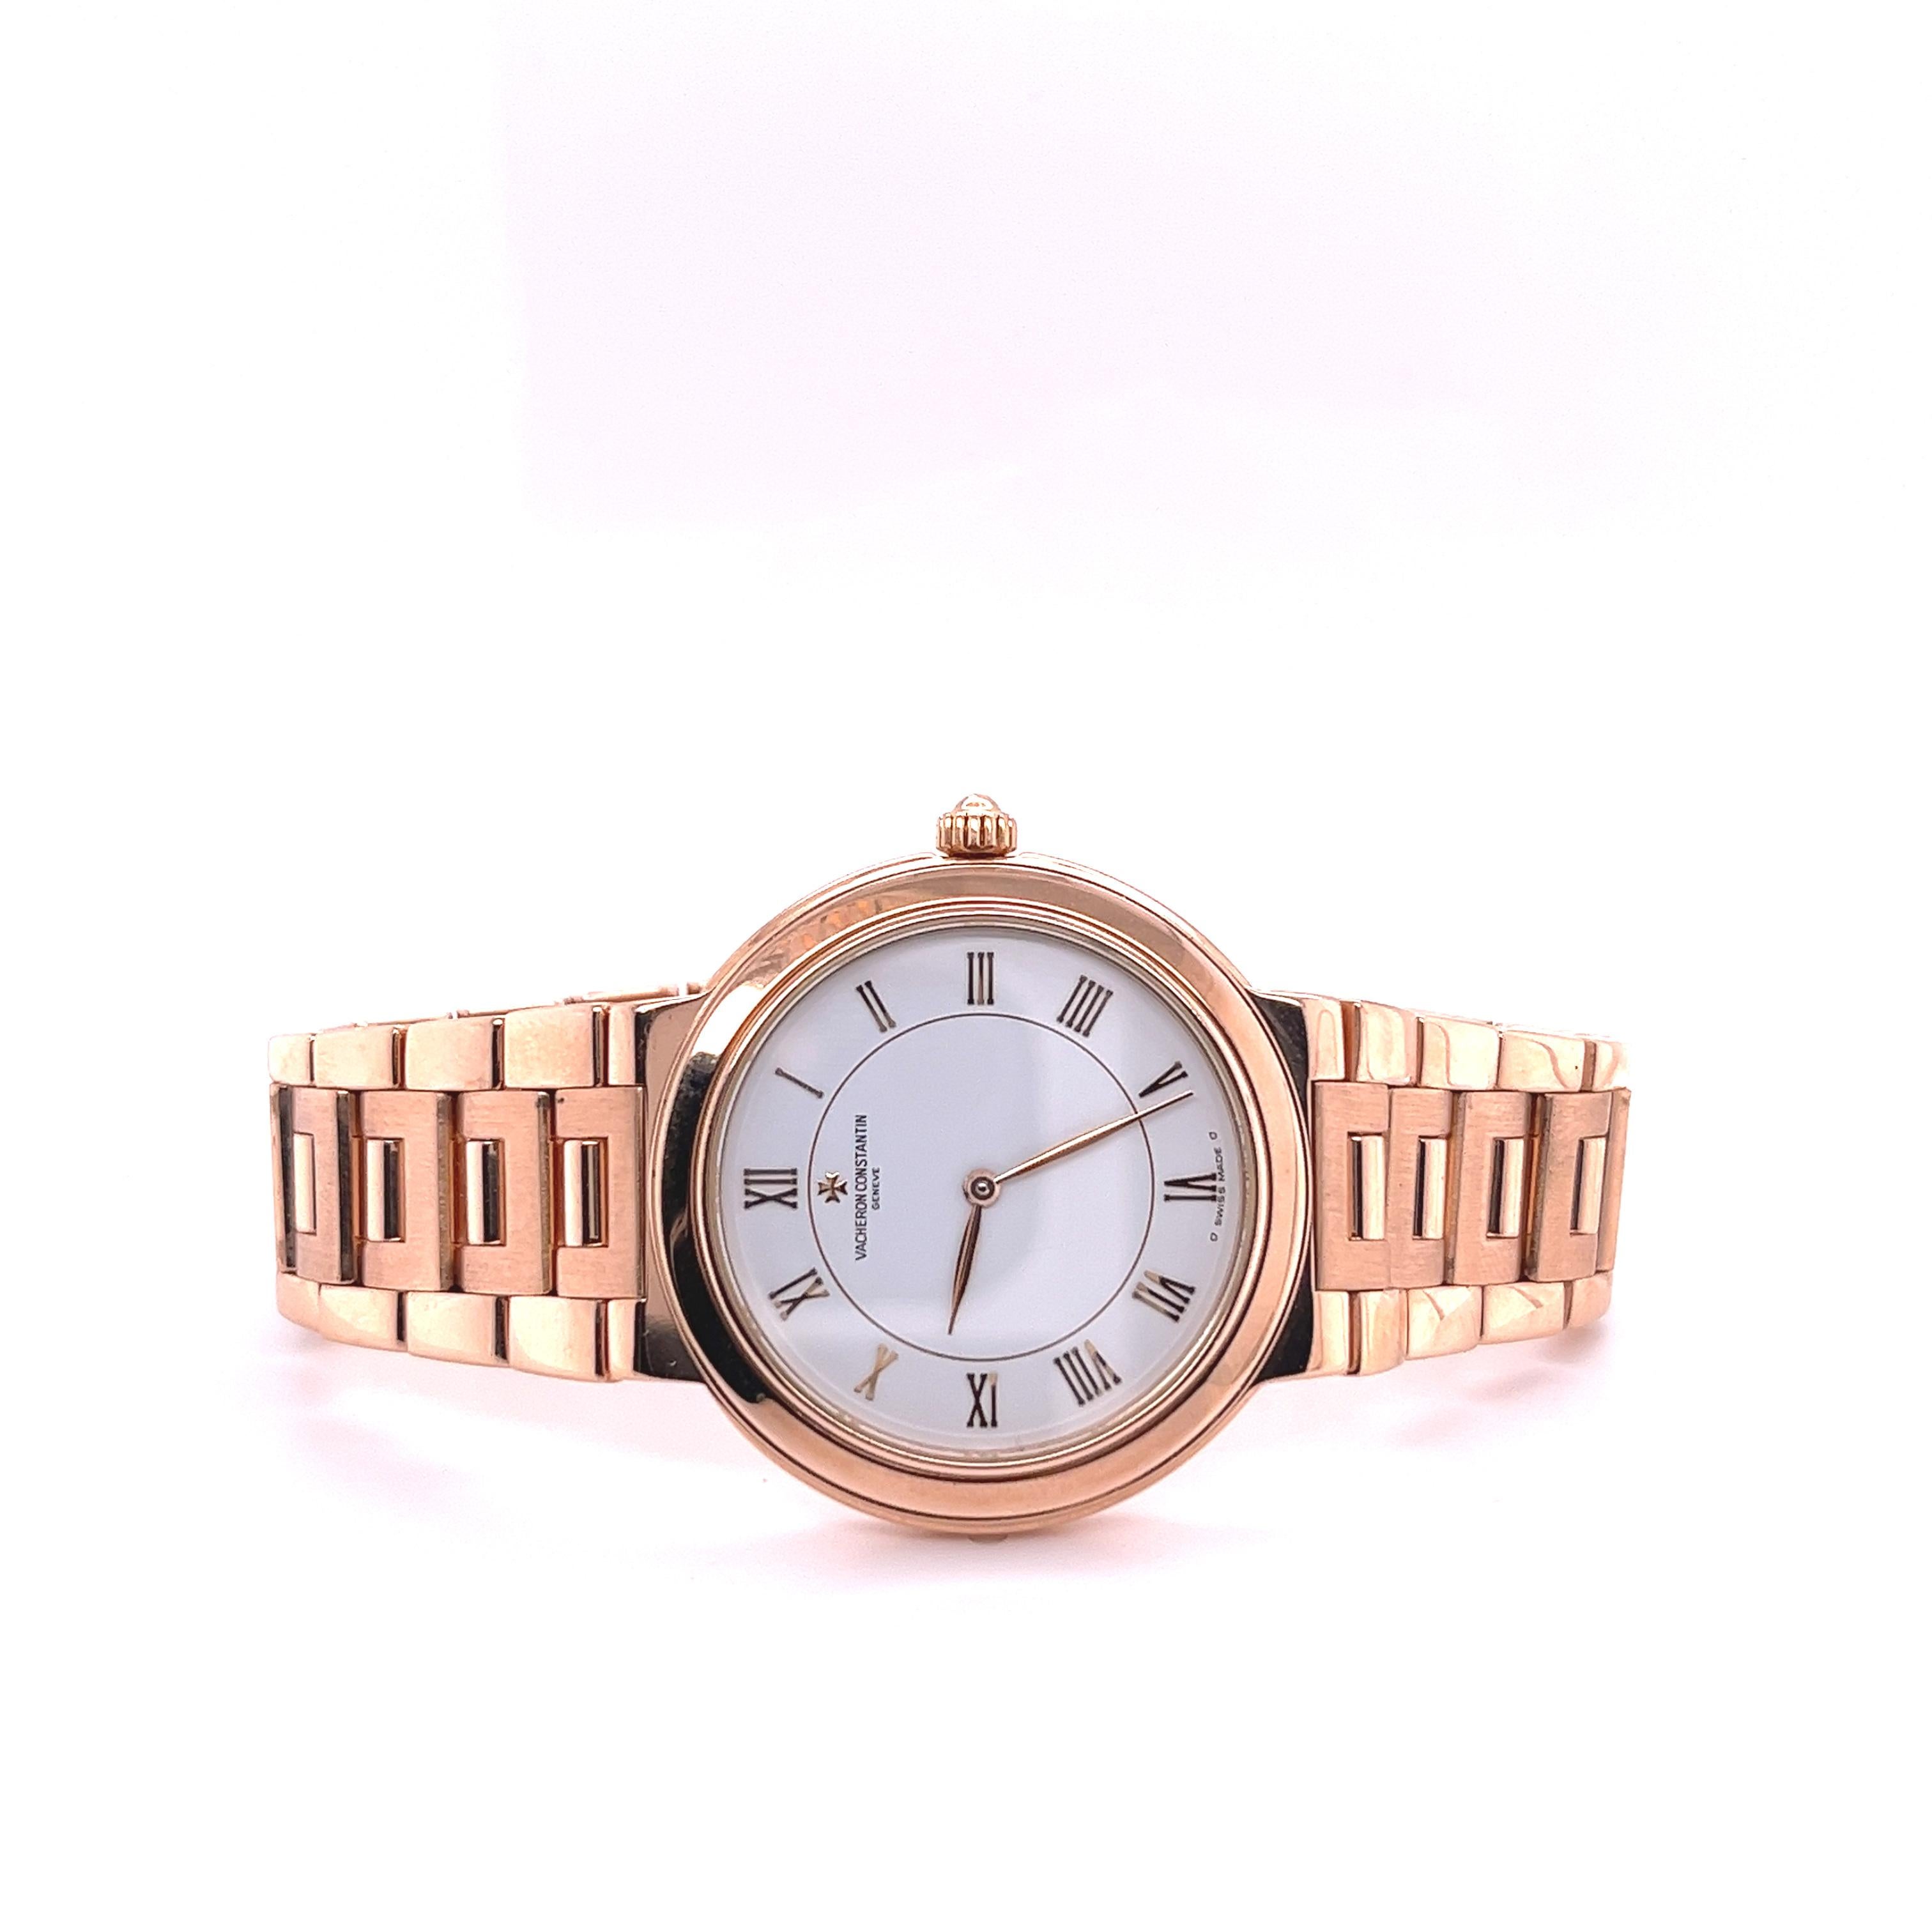 Vacheron Constantin Patrimony Ultra Thin in 18K Rose Gold 670852 In Excellent Condition For Sale In Miami, FL